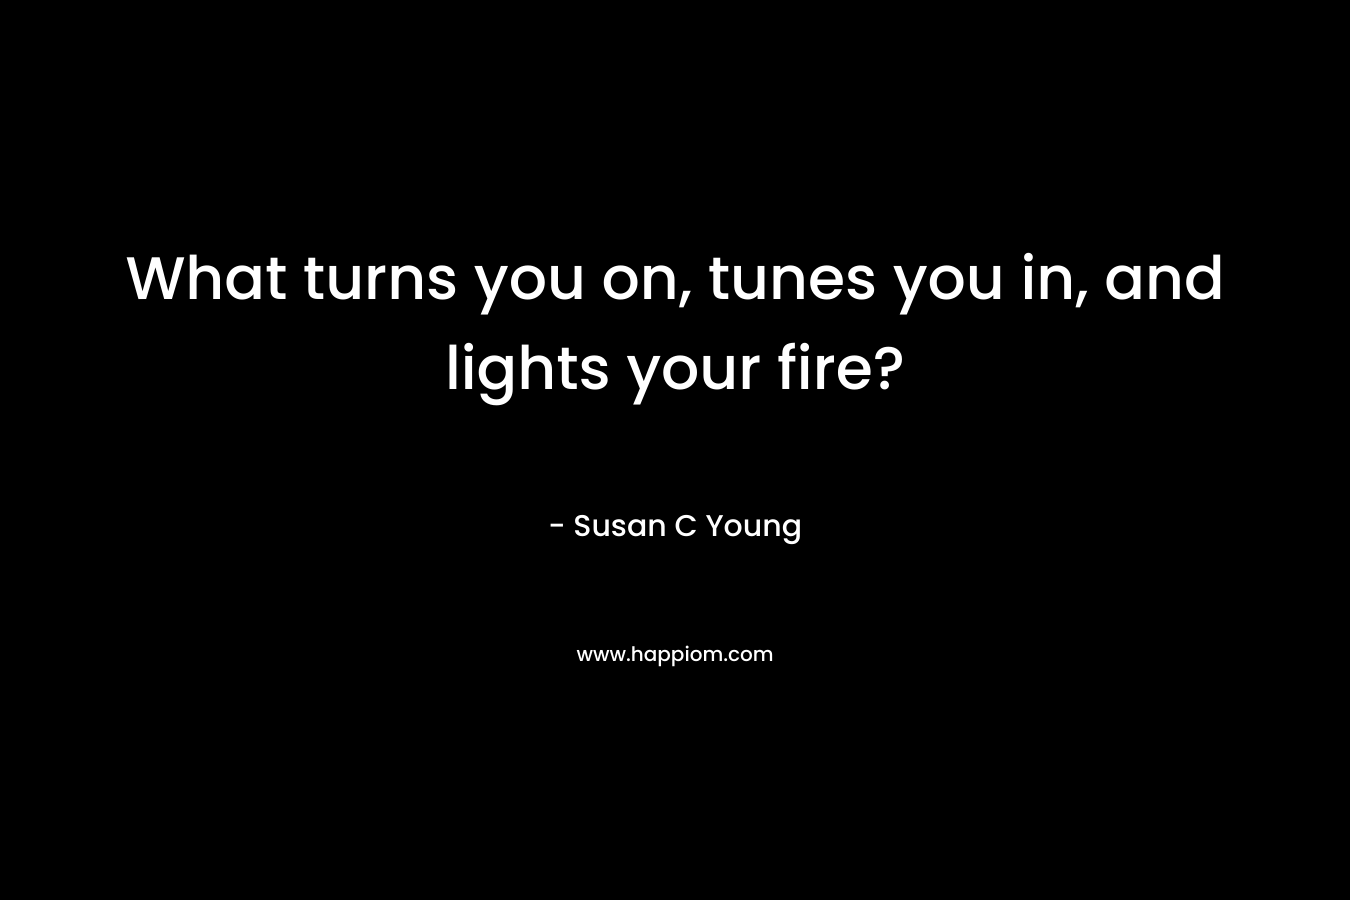 What turns you on, tunes you in, and lights your fire? – Susan C Young